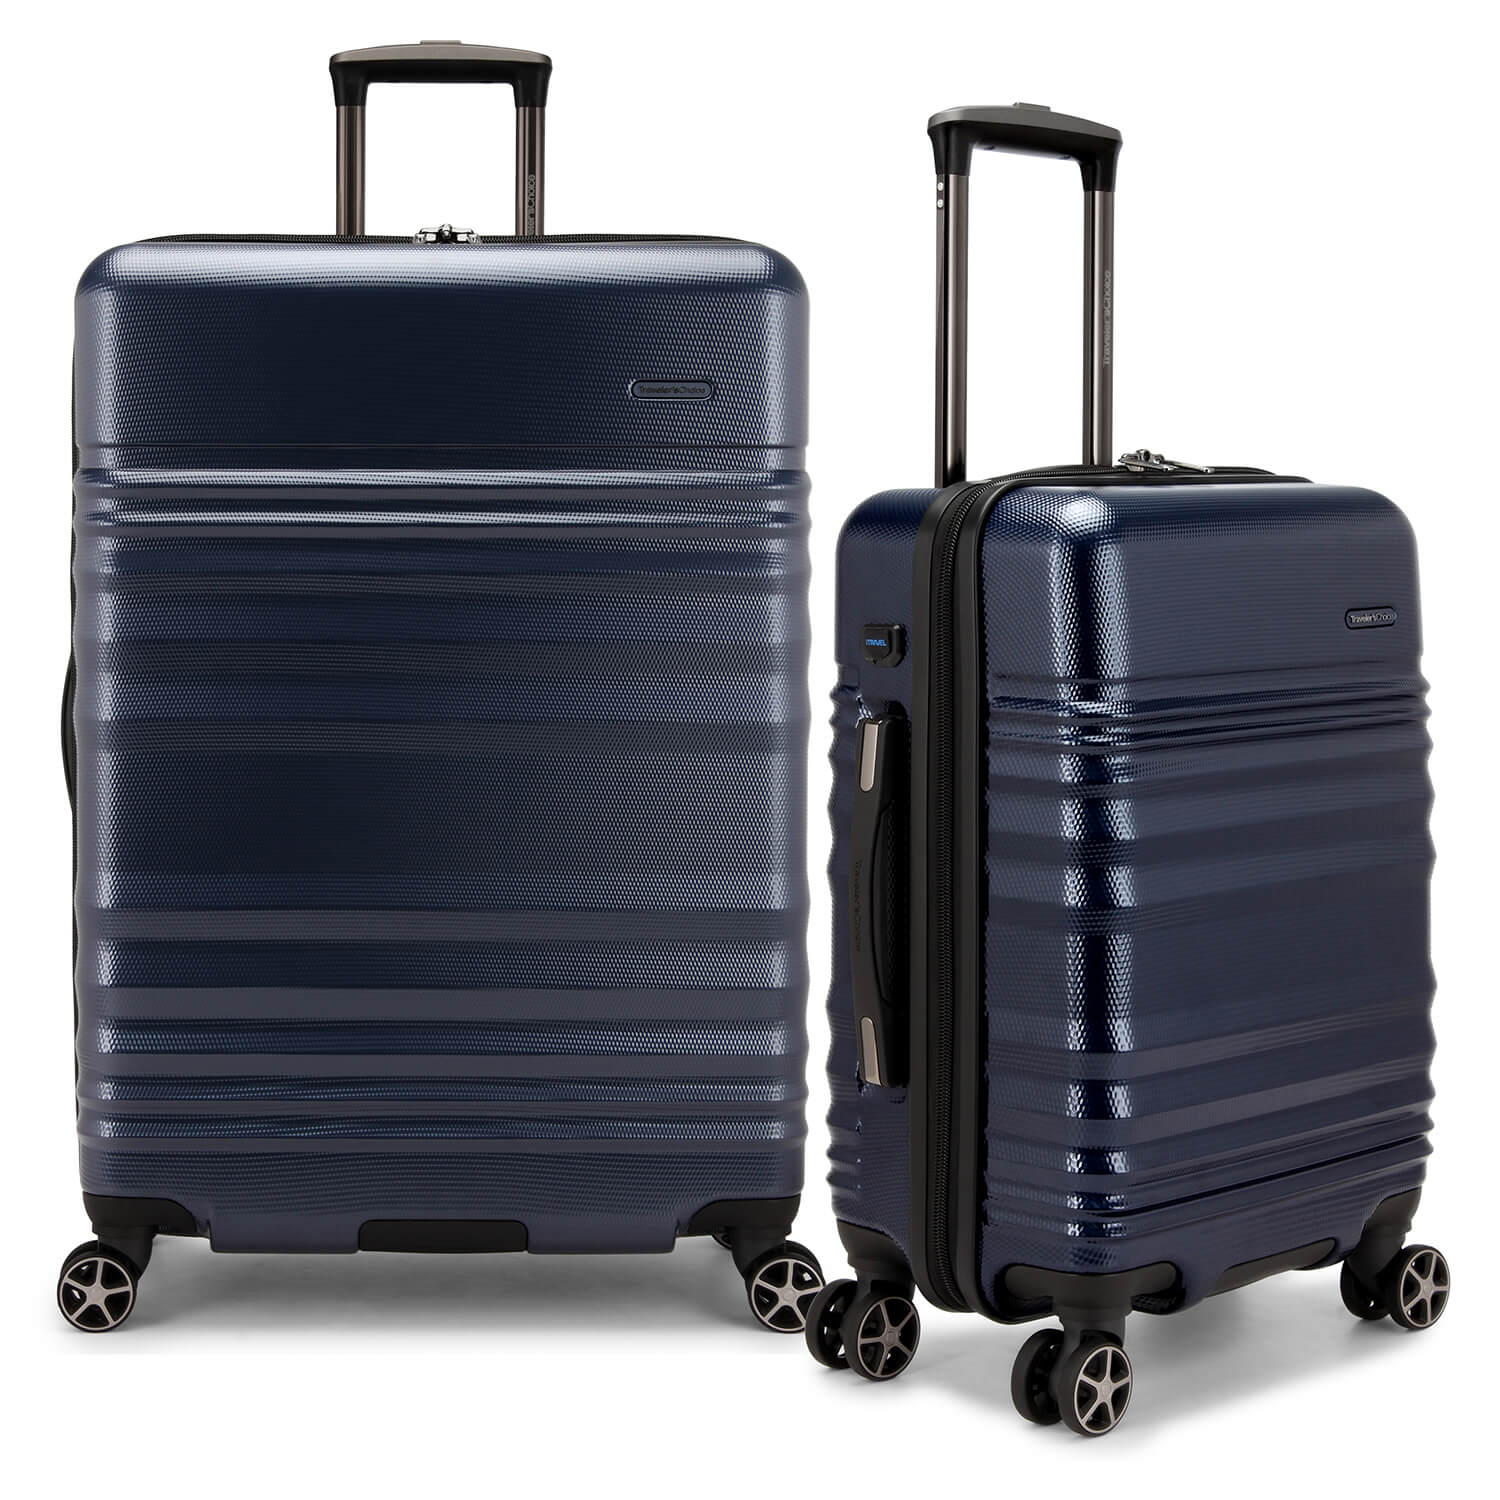 Wheels for Pomona Luggage Collection – Traveler's Choice